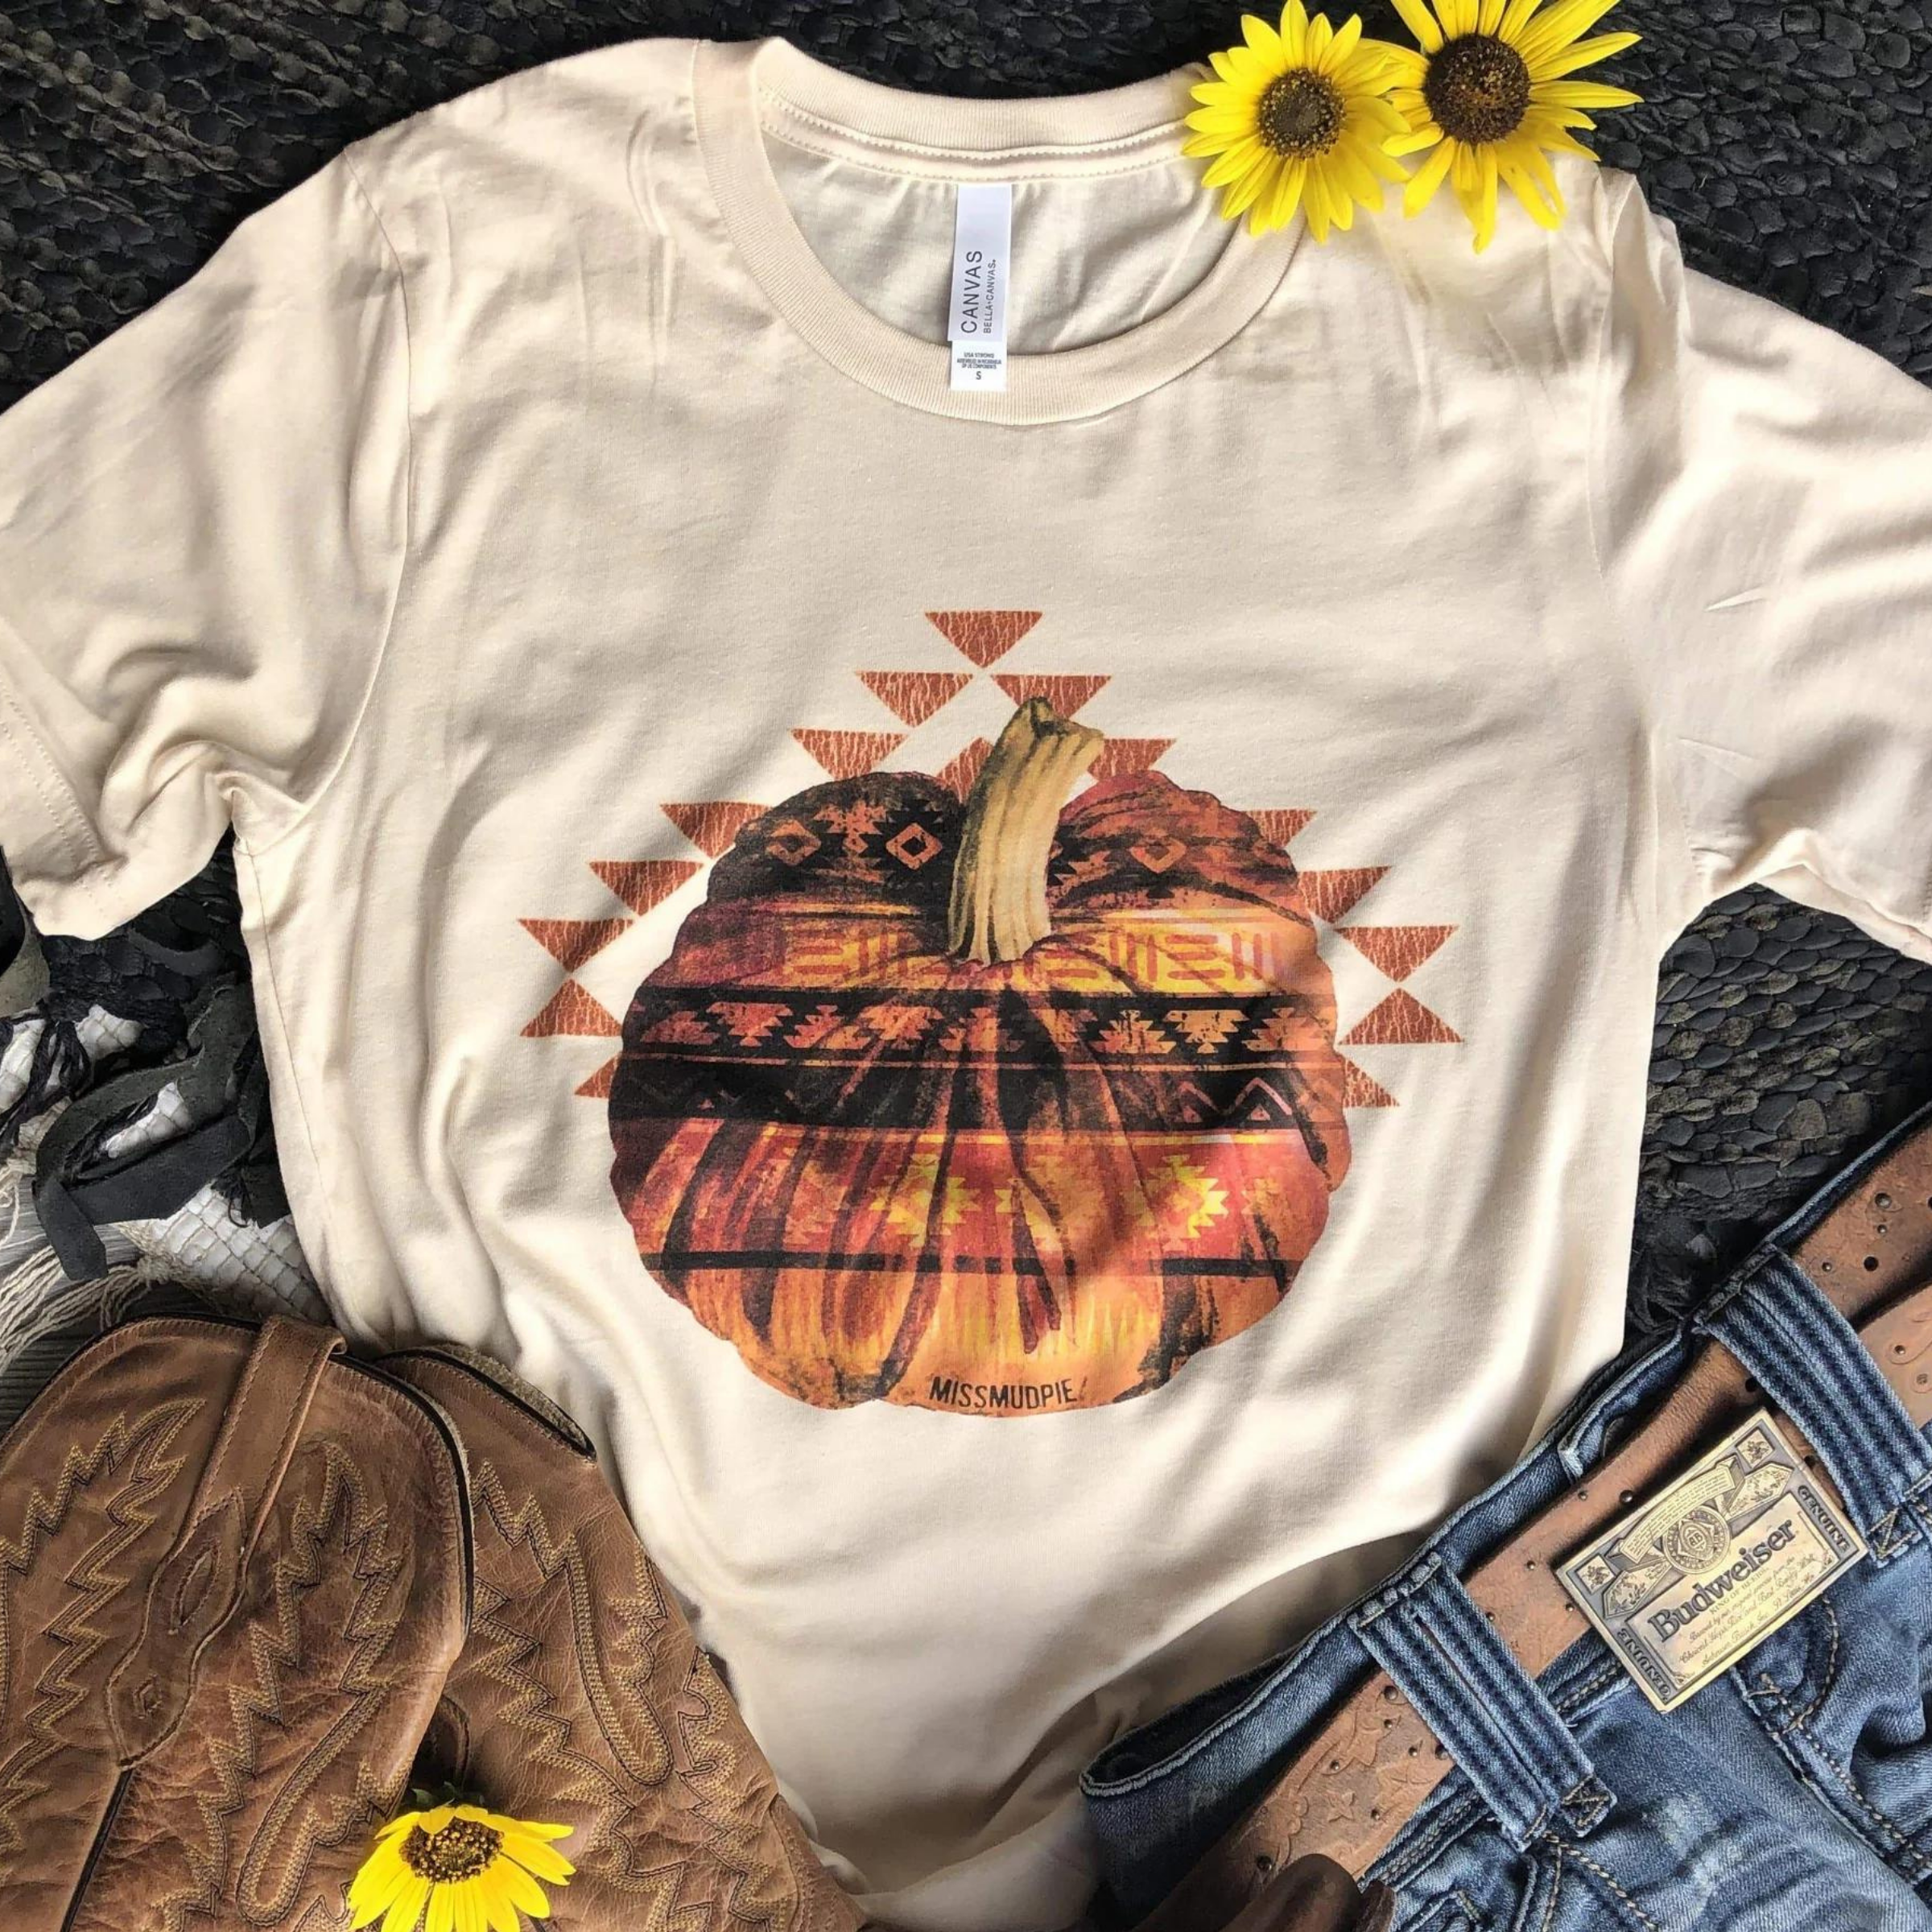 This is a cream colored tee with an Aztec designed pumpkin. Surrounding the pumpkin is several many triangles. This top is pictured with some blue jeans and brown cowgirl boots along with two little sunflowers.